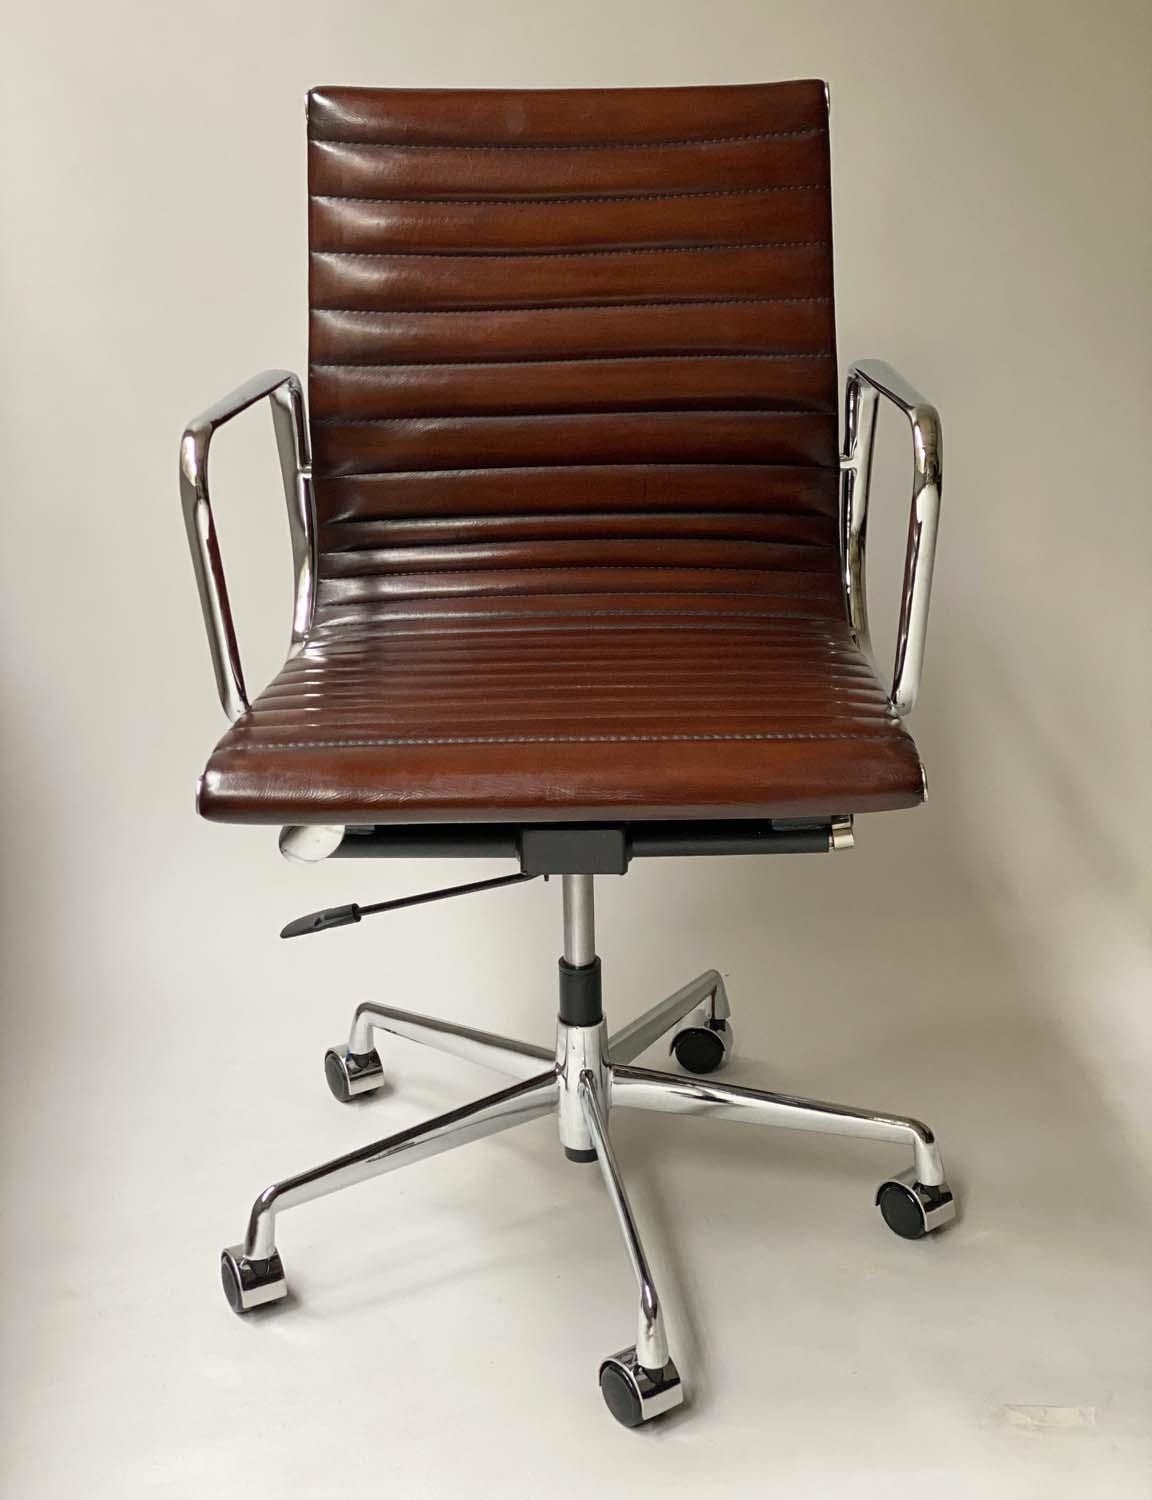 REVOLVING DESK CHAIR, Charles and Ray Eames inspired with ribbed tan leather seat revolving and - Image 2 of 6